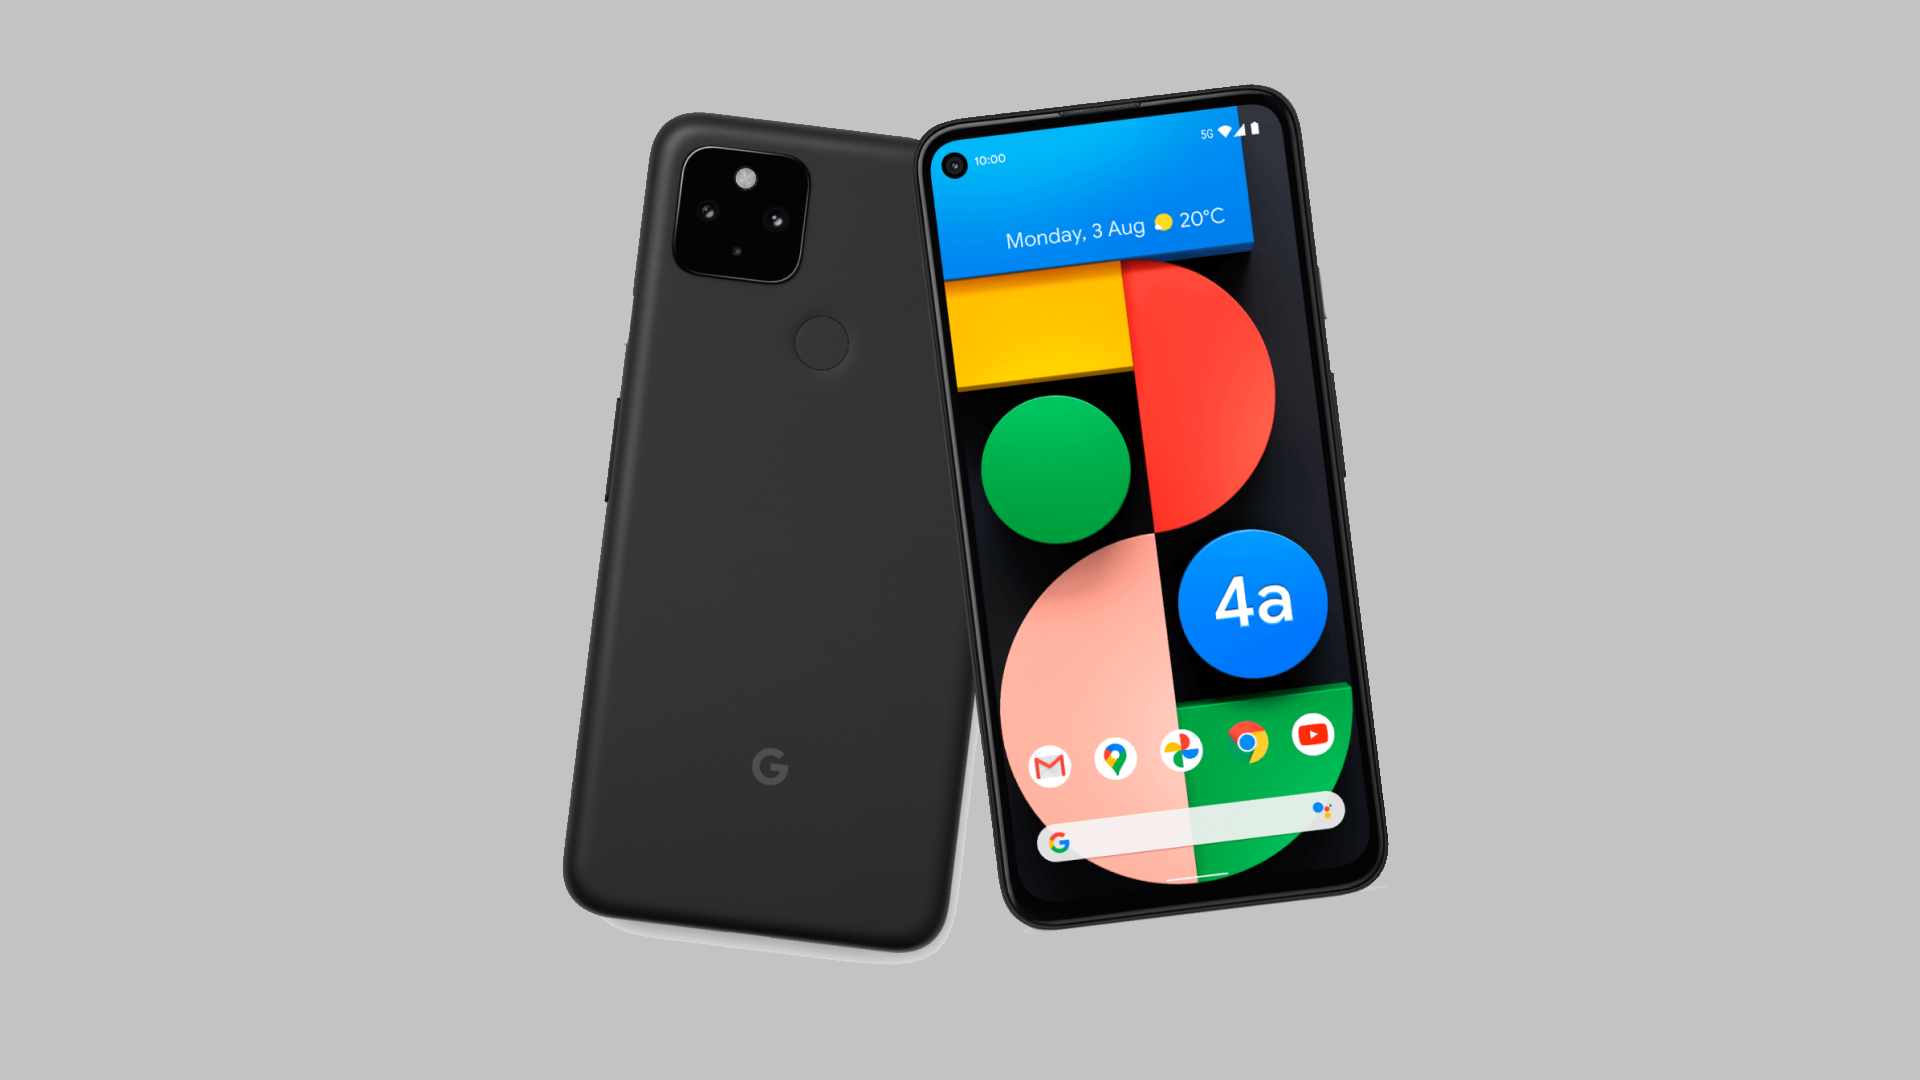 Back in stock – Pixel 4a for £249 is a Black Friday bargain